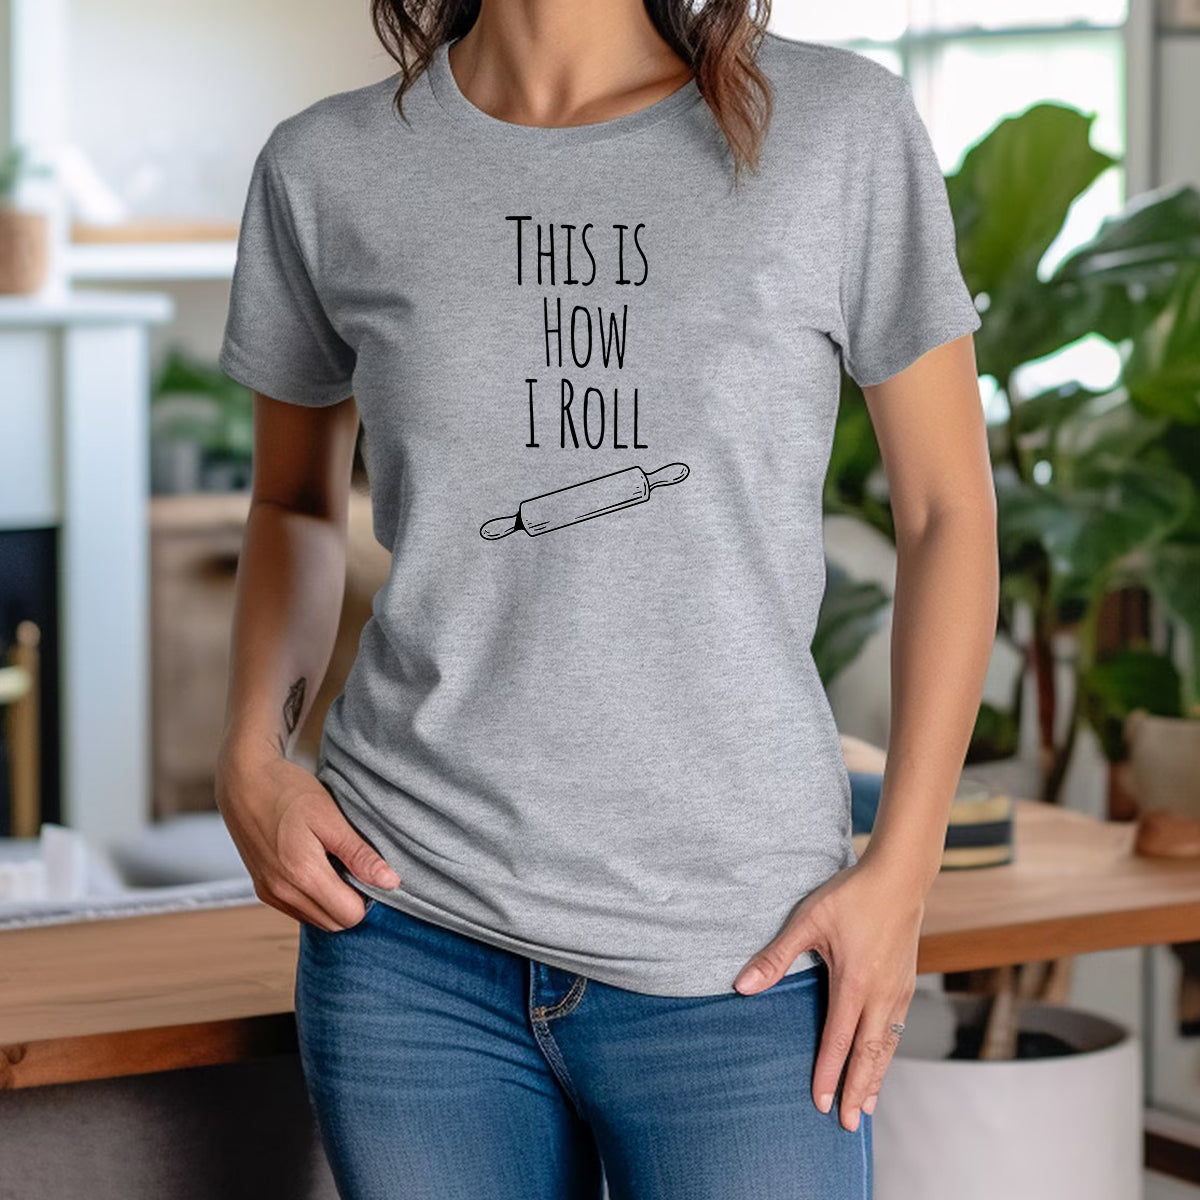 "This Is How I Roll" Premium Midweight Ringspun Cotton T-Shirt - Womens Fits